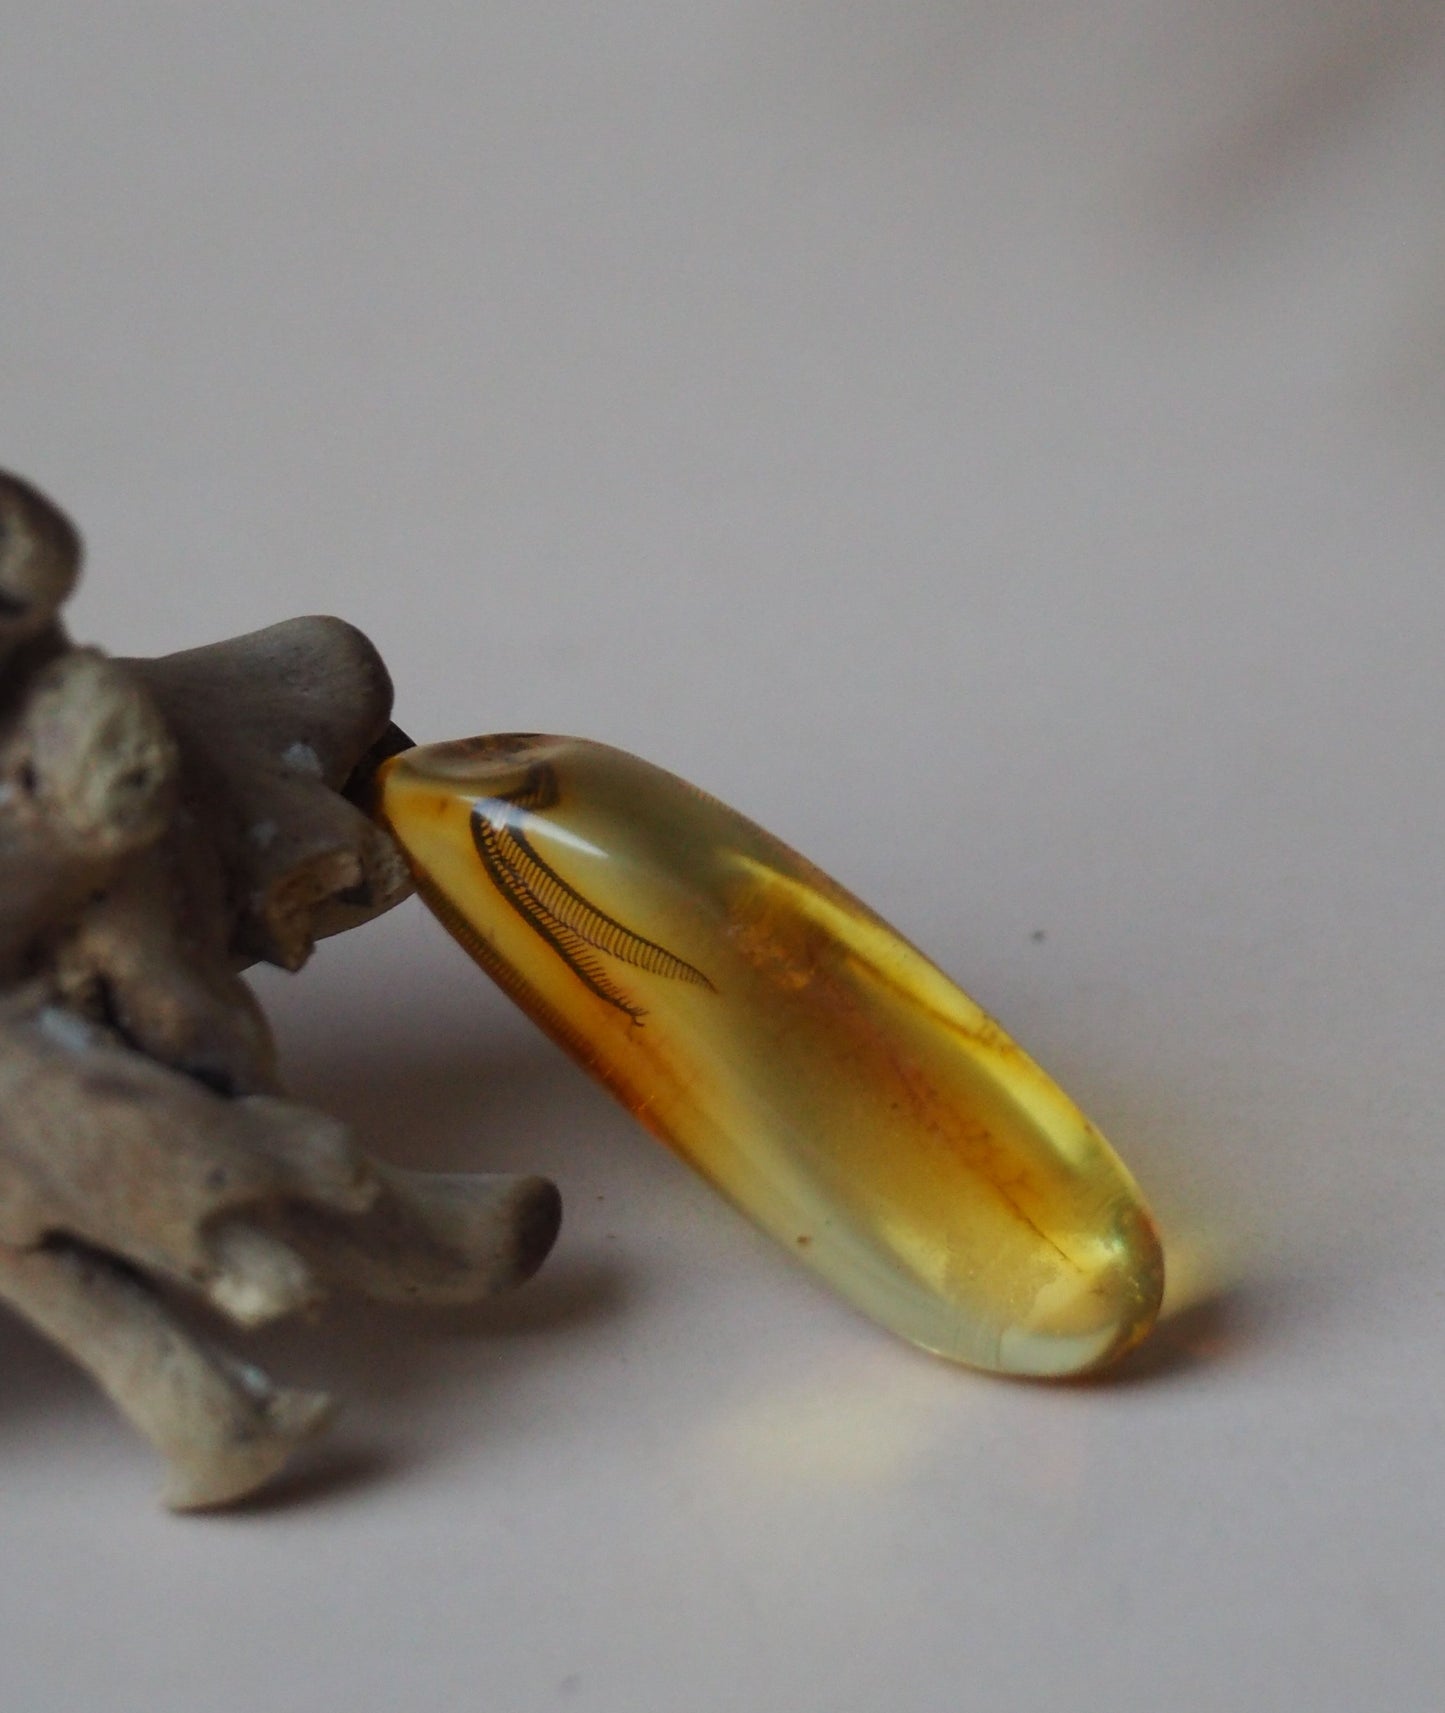 Amber Piece with Natural Insect Inclusion - Well Visible Insect's Wing